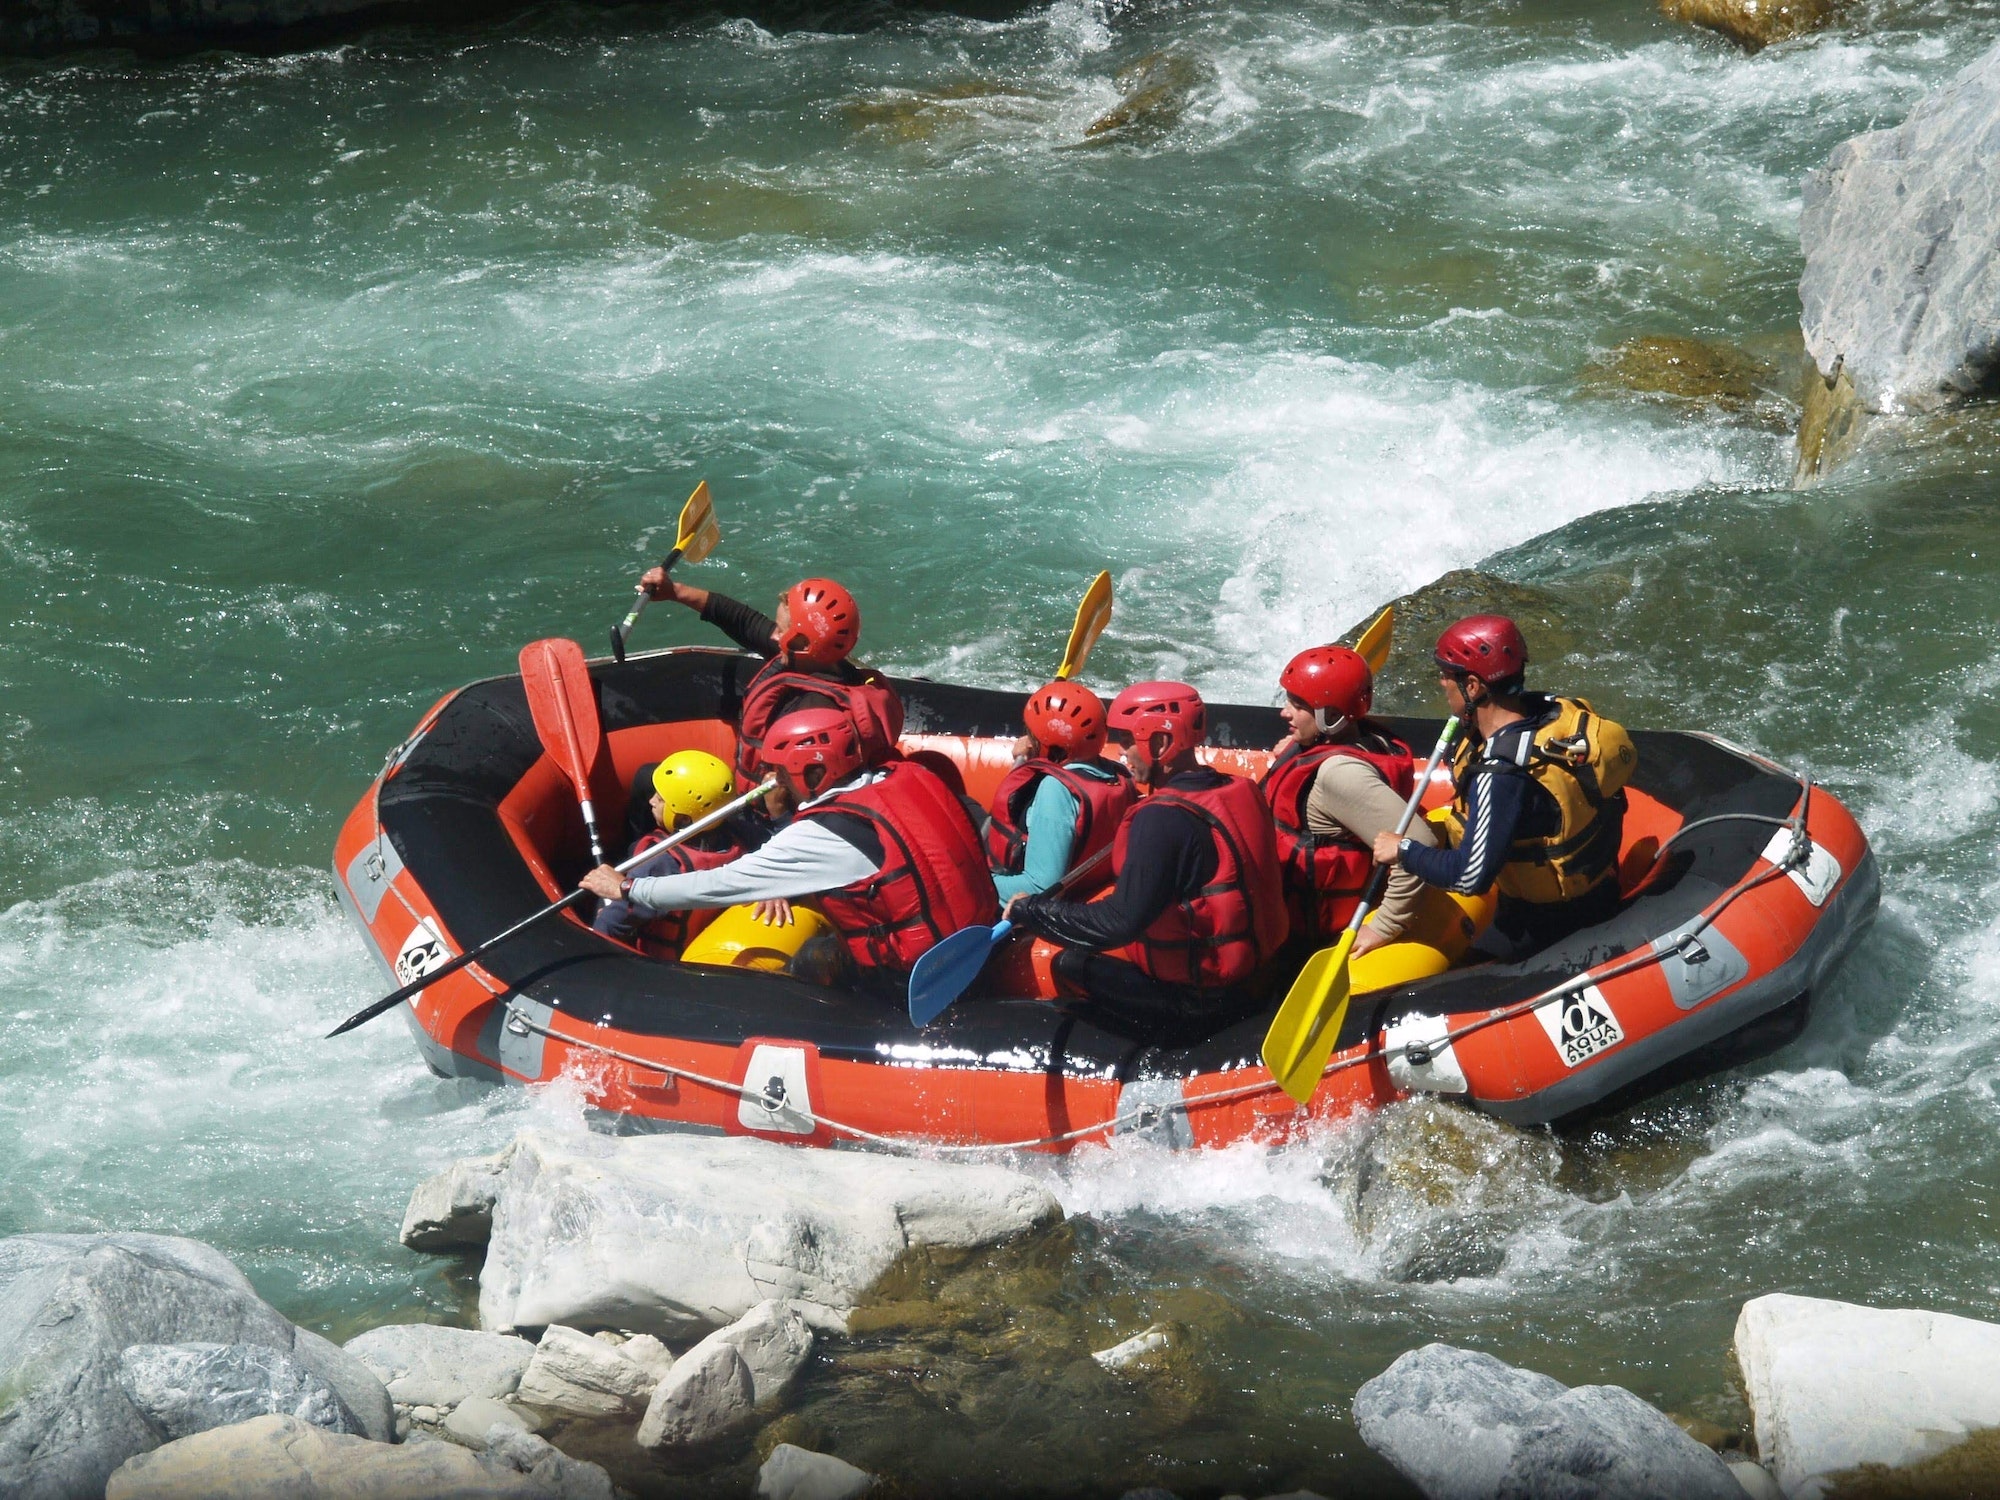 Rafting is a great recreational outdoor activities!